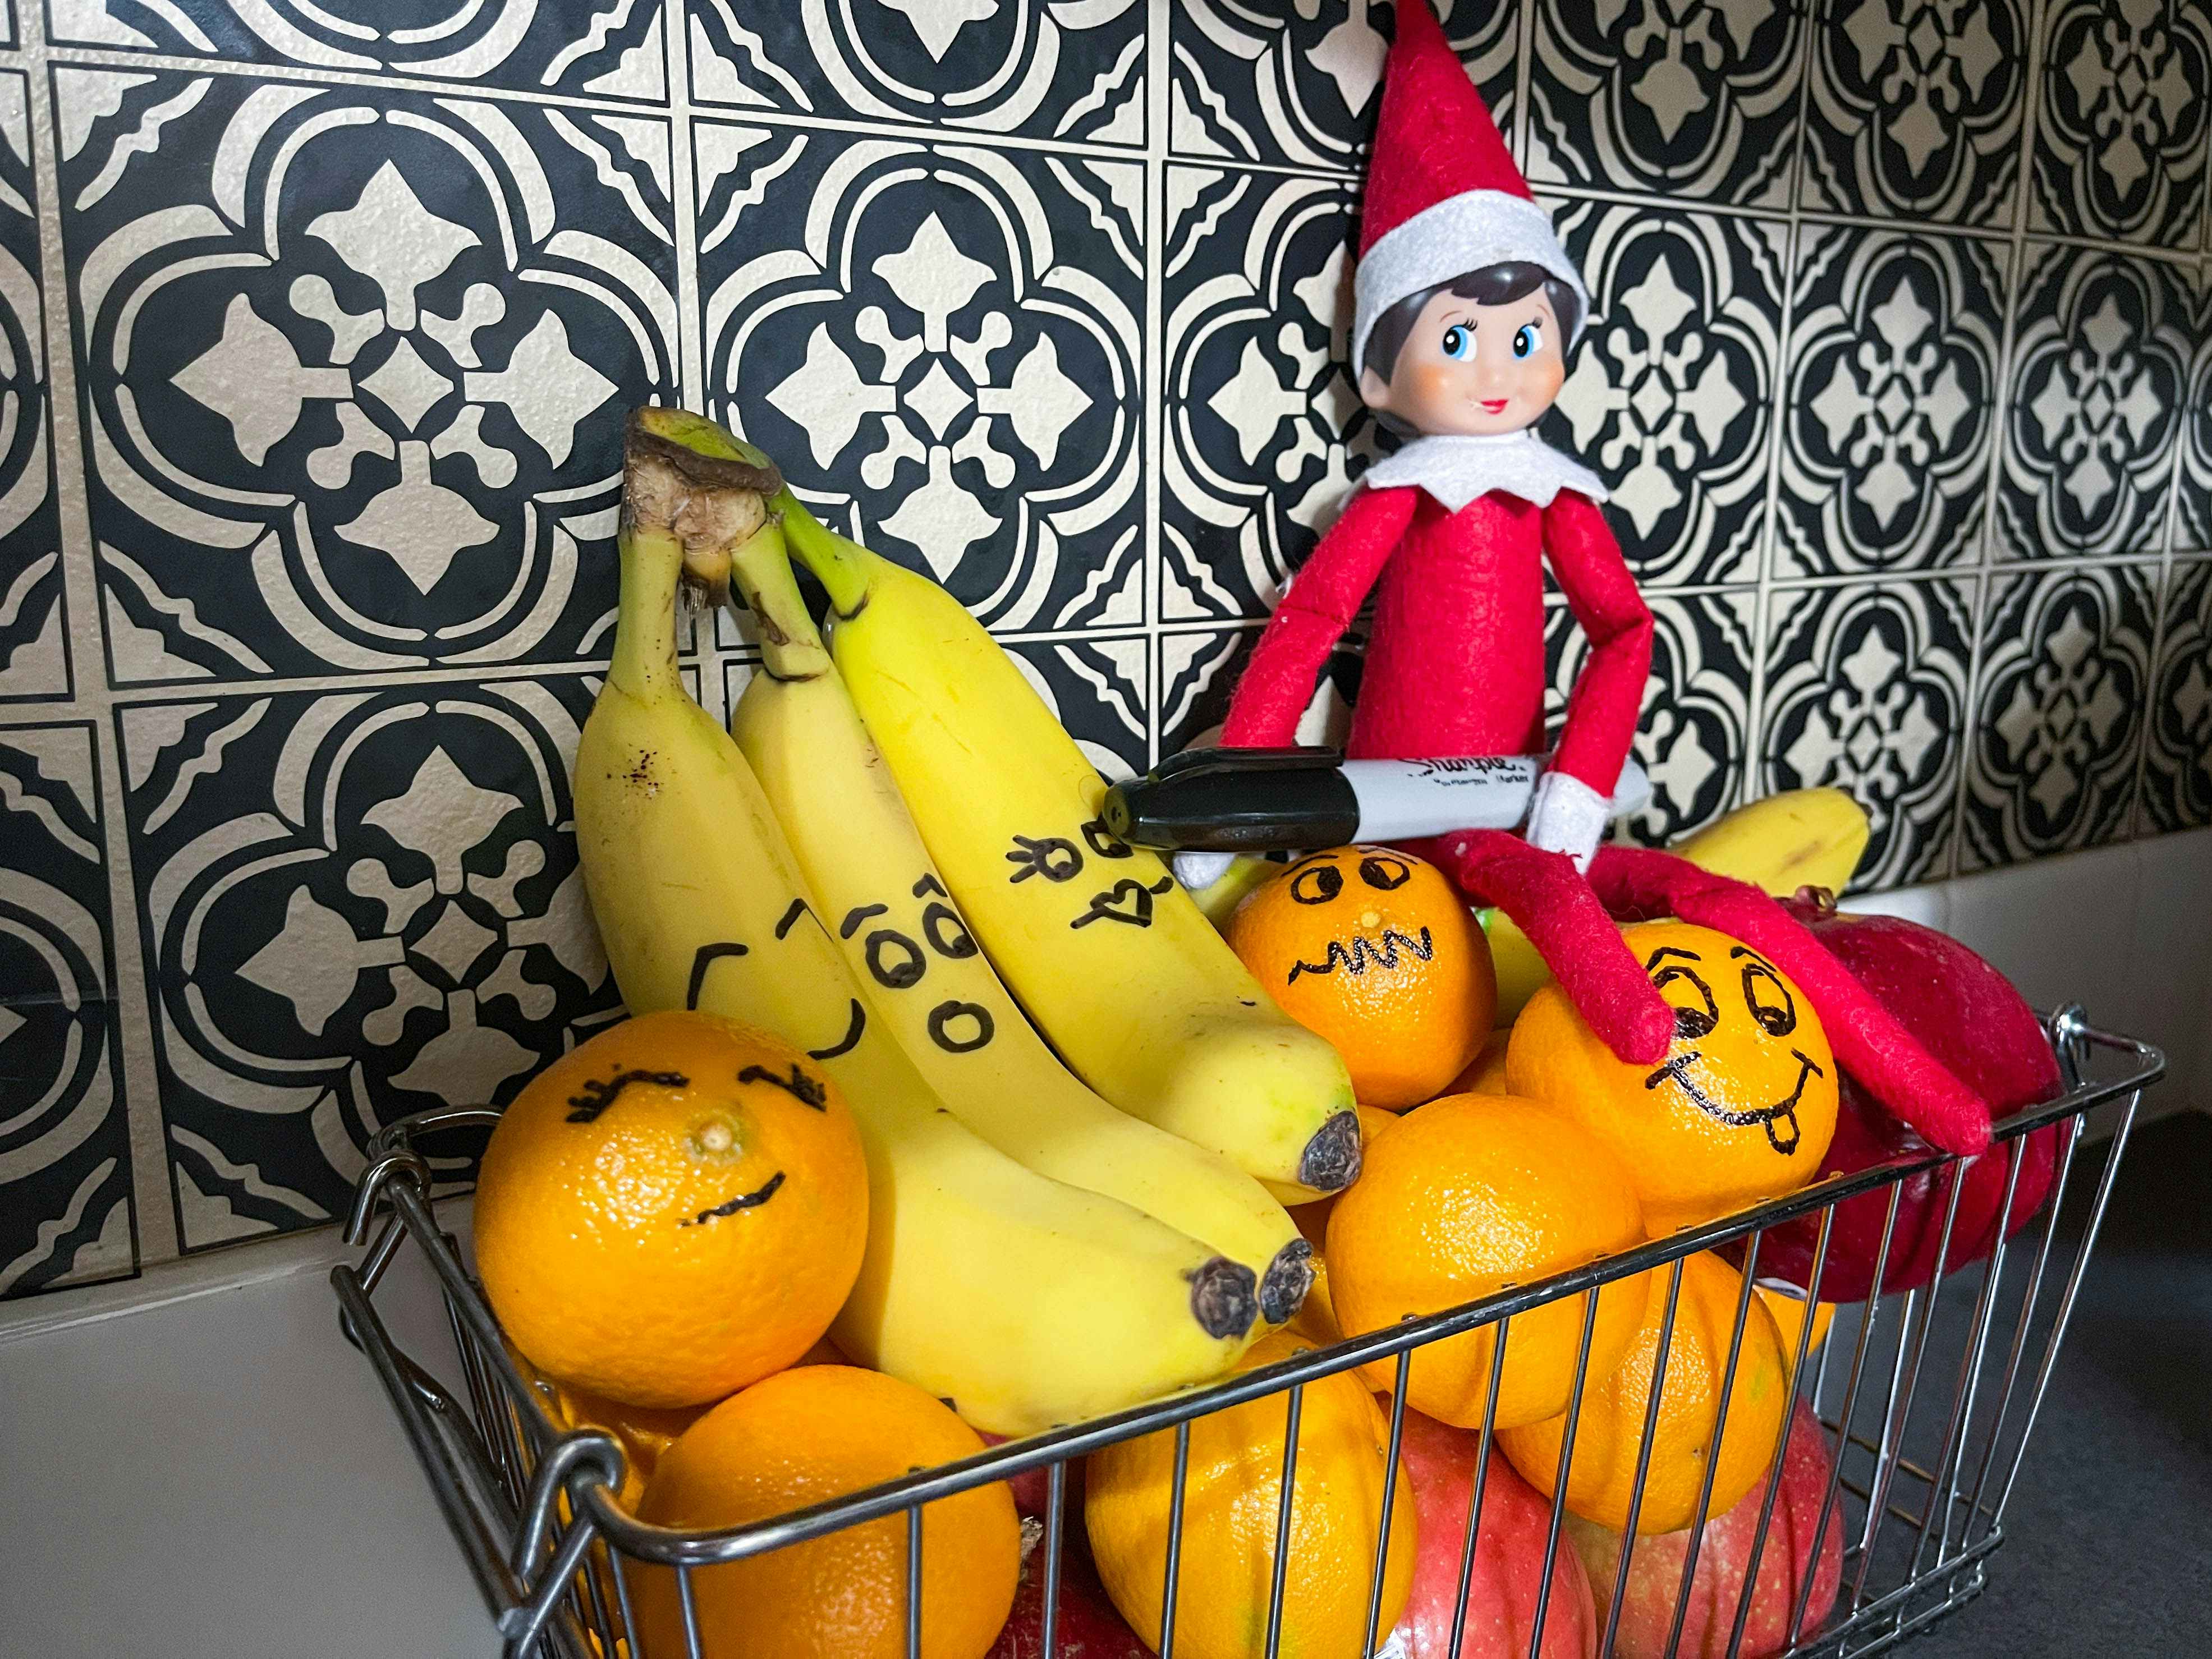 an elf on the shelf doll holding sharpie with faces marked on bananas and oranges in a basket of fruit 